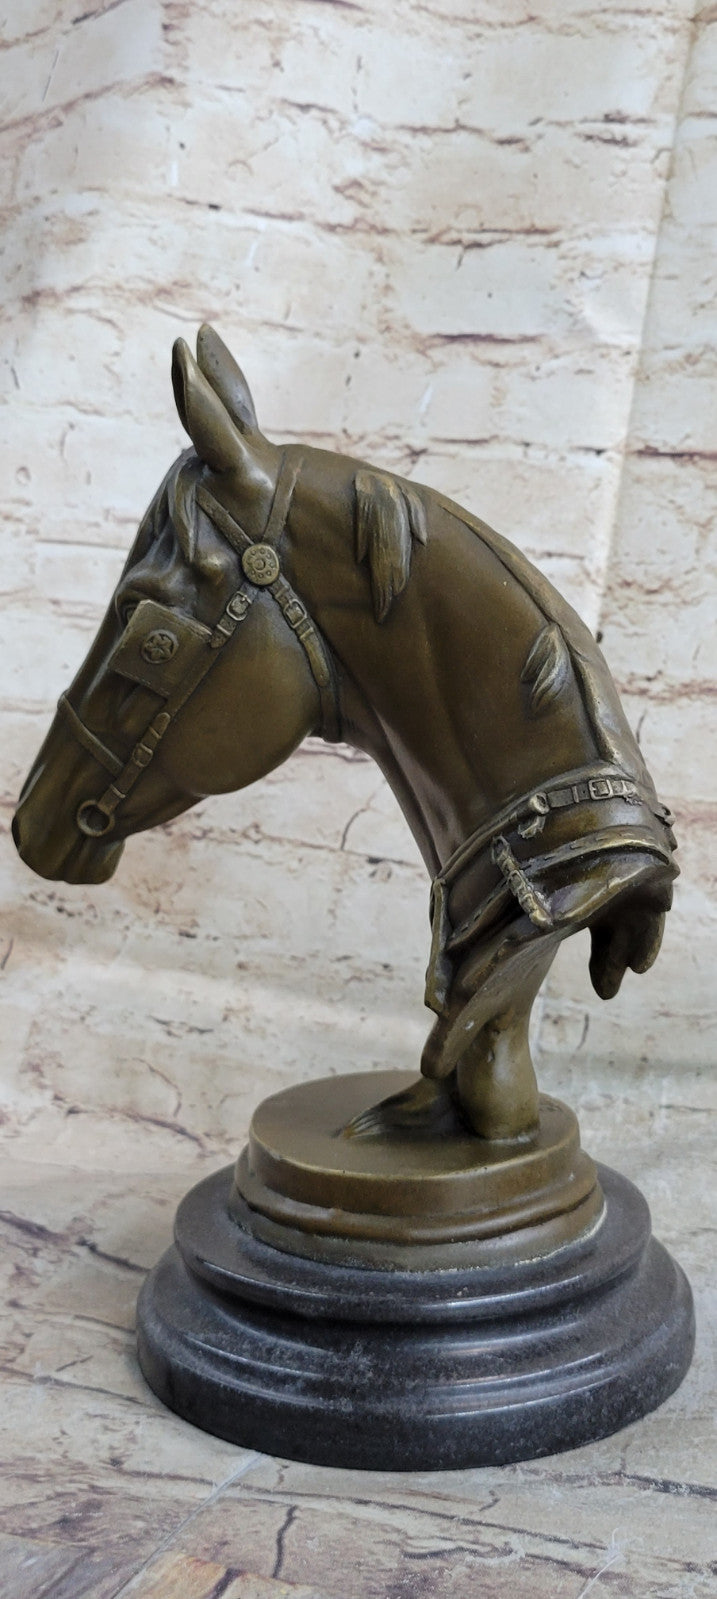 Handcrafted bronze sculpture SALE Decor Home Barye Marble Head Horses Cast Hot